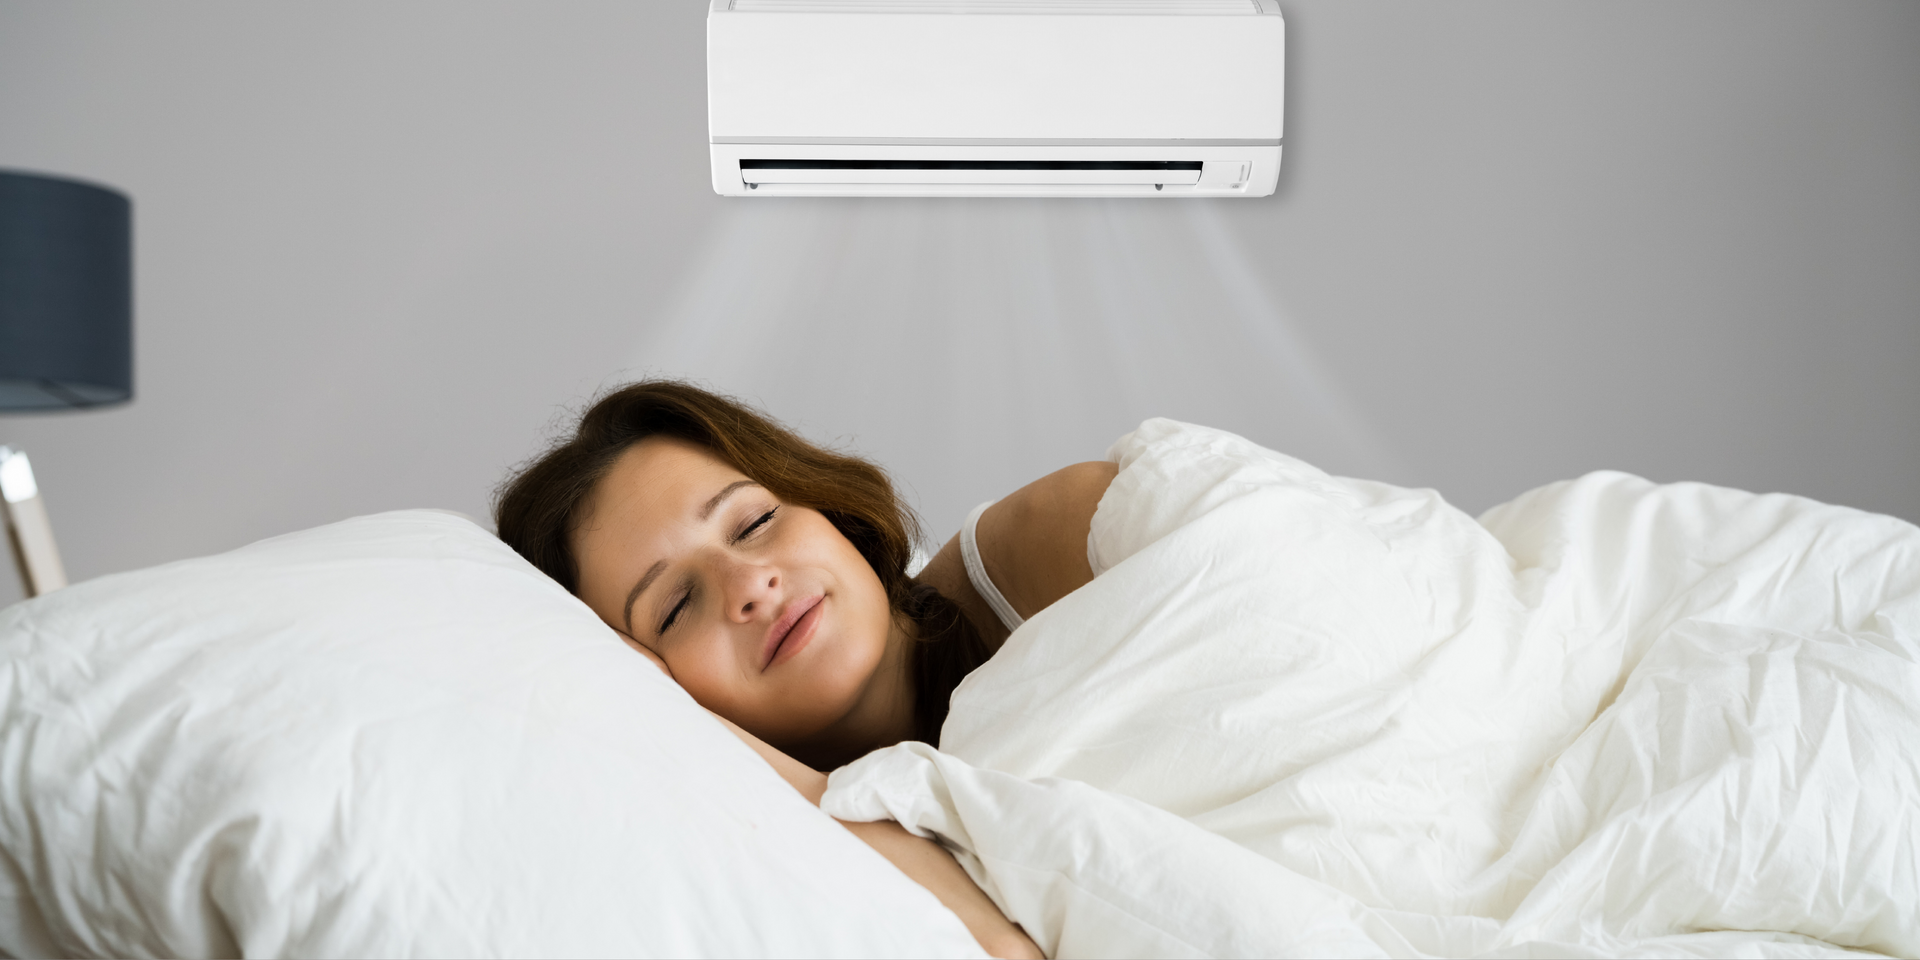 Woman asleep in bedroom with air conditioner blowing cool air